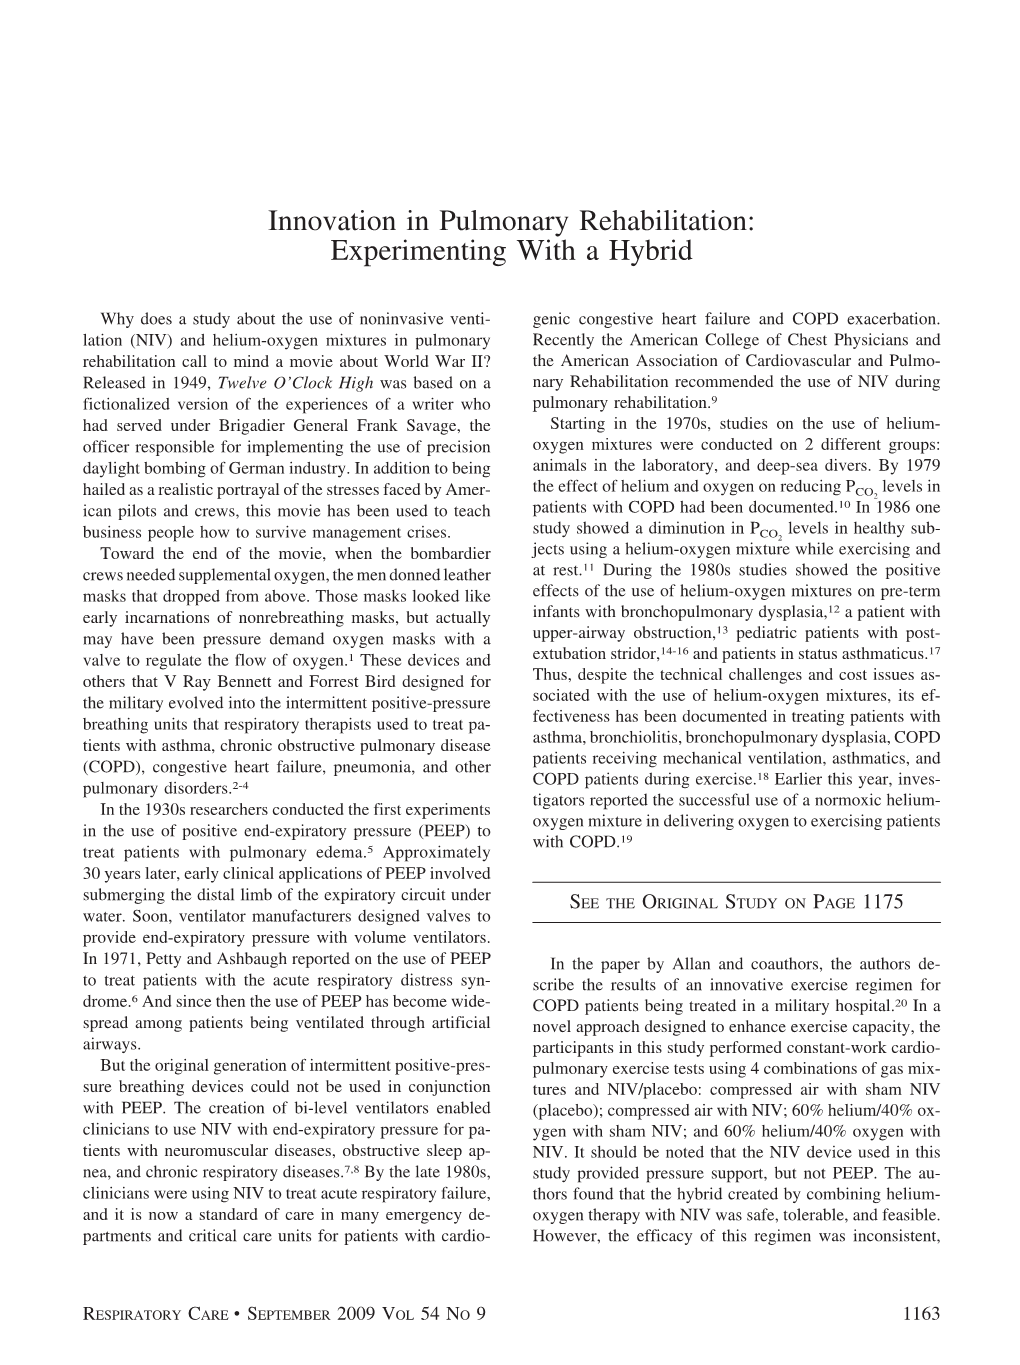 Innovation in Pulmonary Rehabilitation: Experimenting with a Hybrid